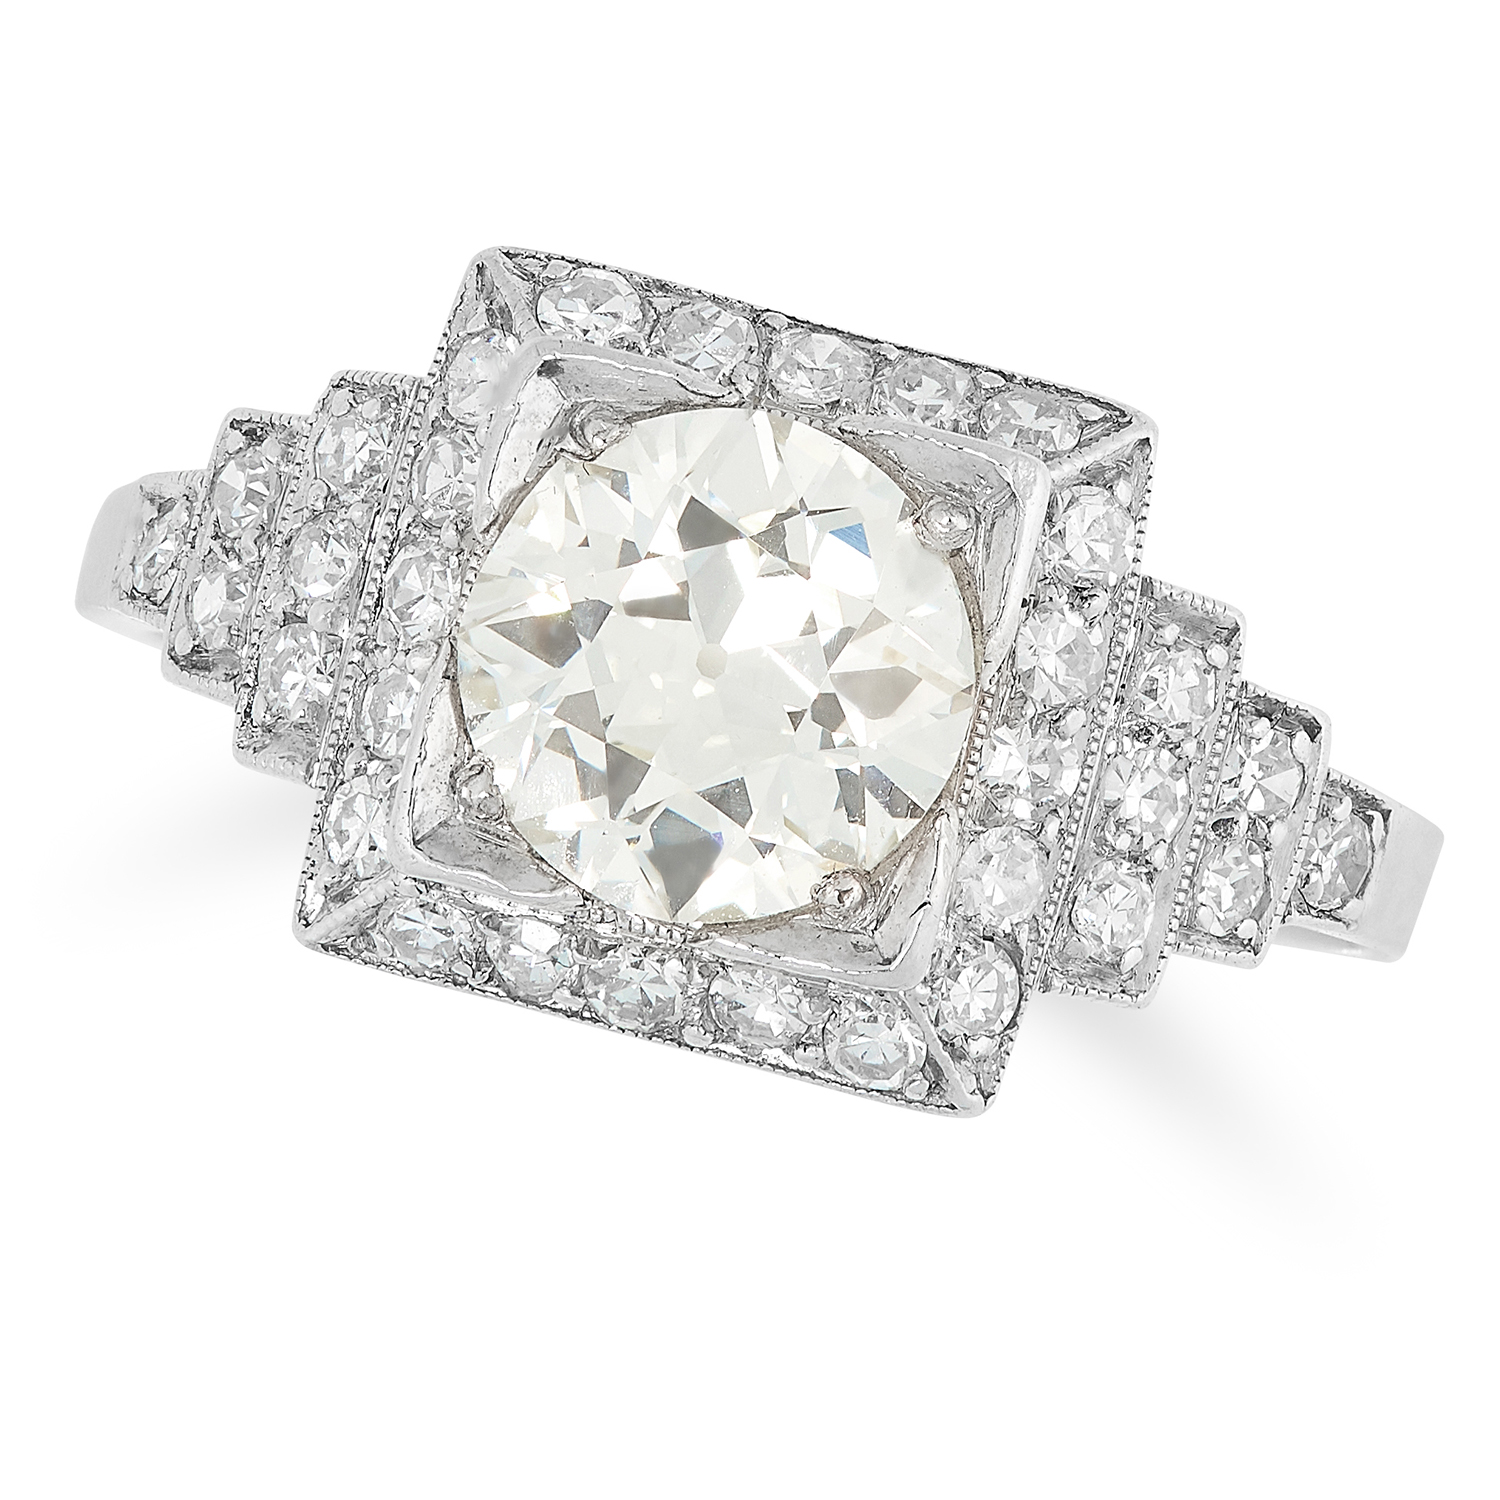 AN ART DECO DIAMOND DRESS RING set with a round cut diamond of 1.15 carats in a border of further